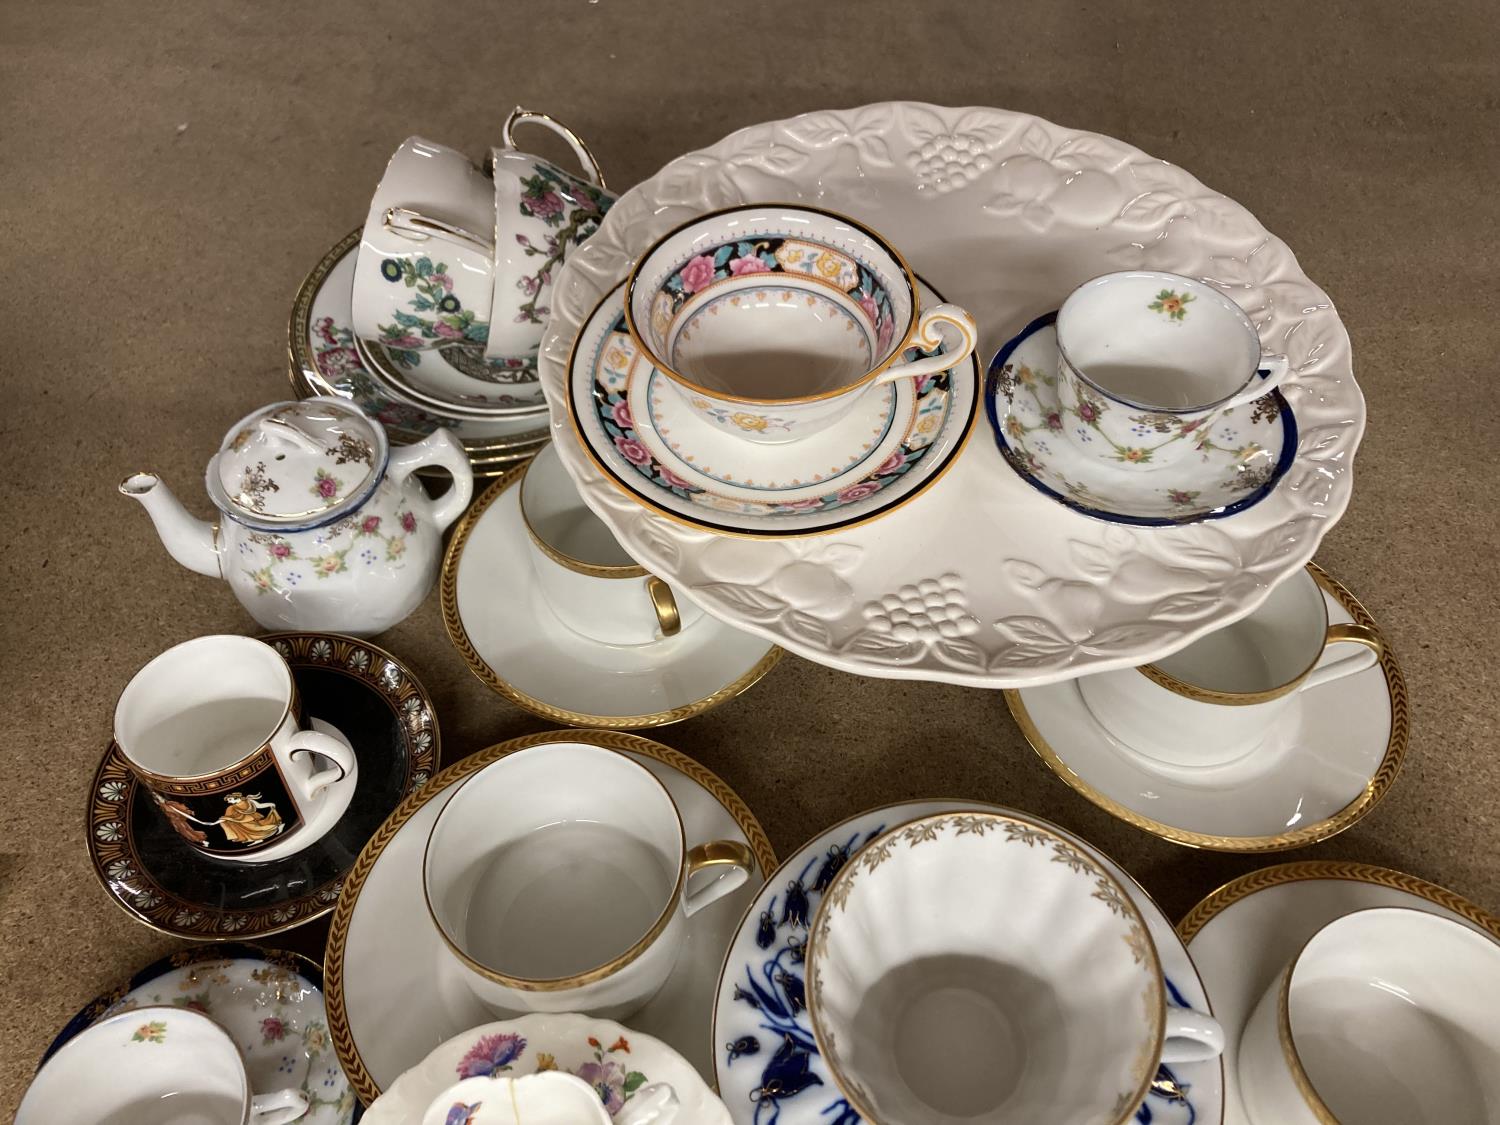 SIX LIMOGES CUPS AND SAUCERS, WHITE WITH GILT RIMS AND HANDLES, A FOOTED CAKE PLATE, VINTAGE ROYAL - Image 2 of 3